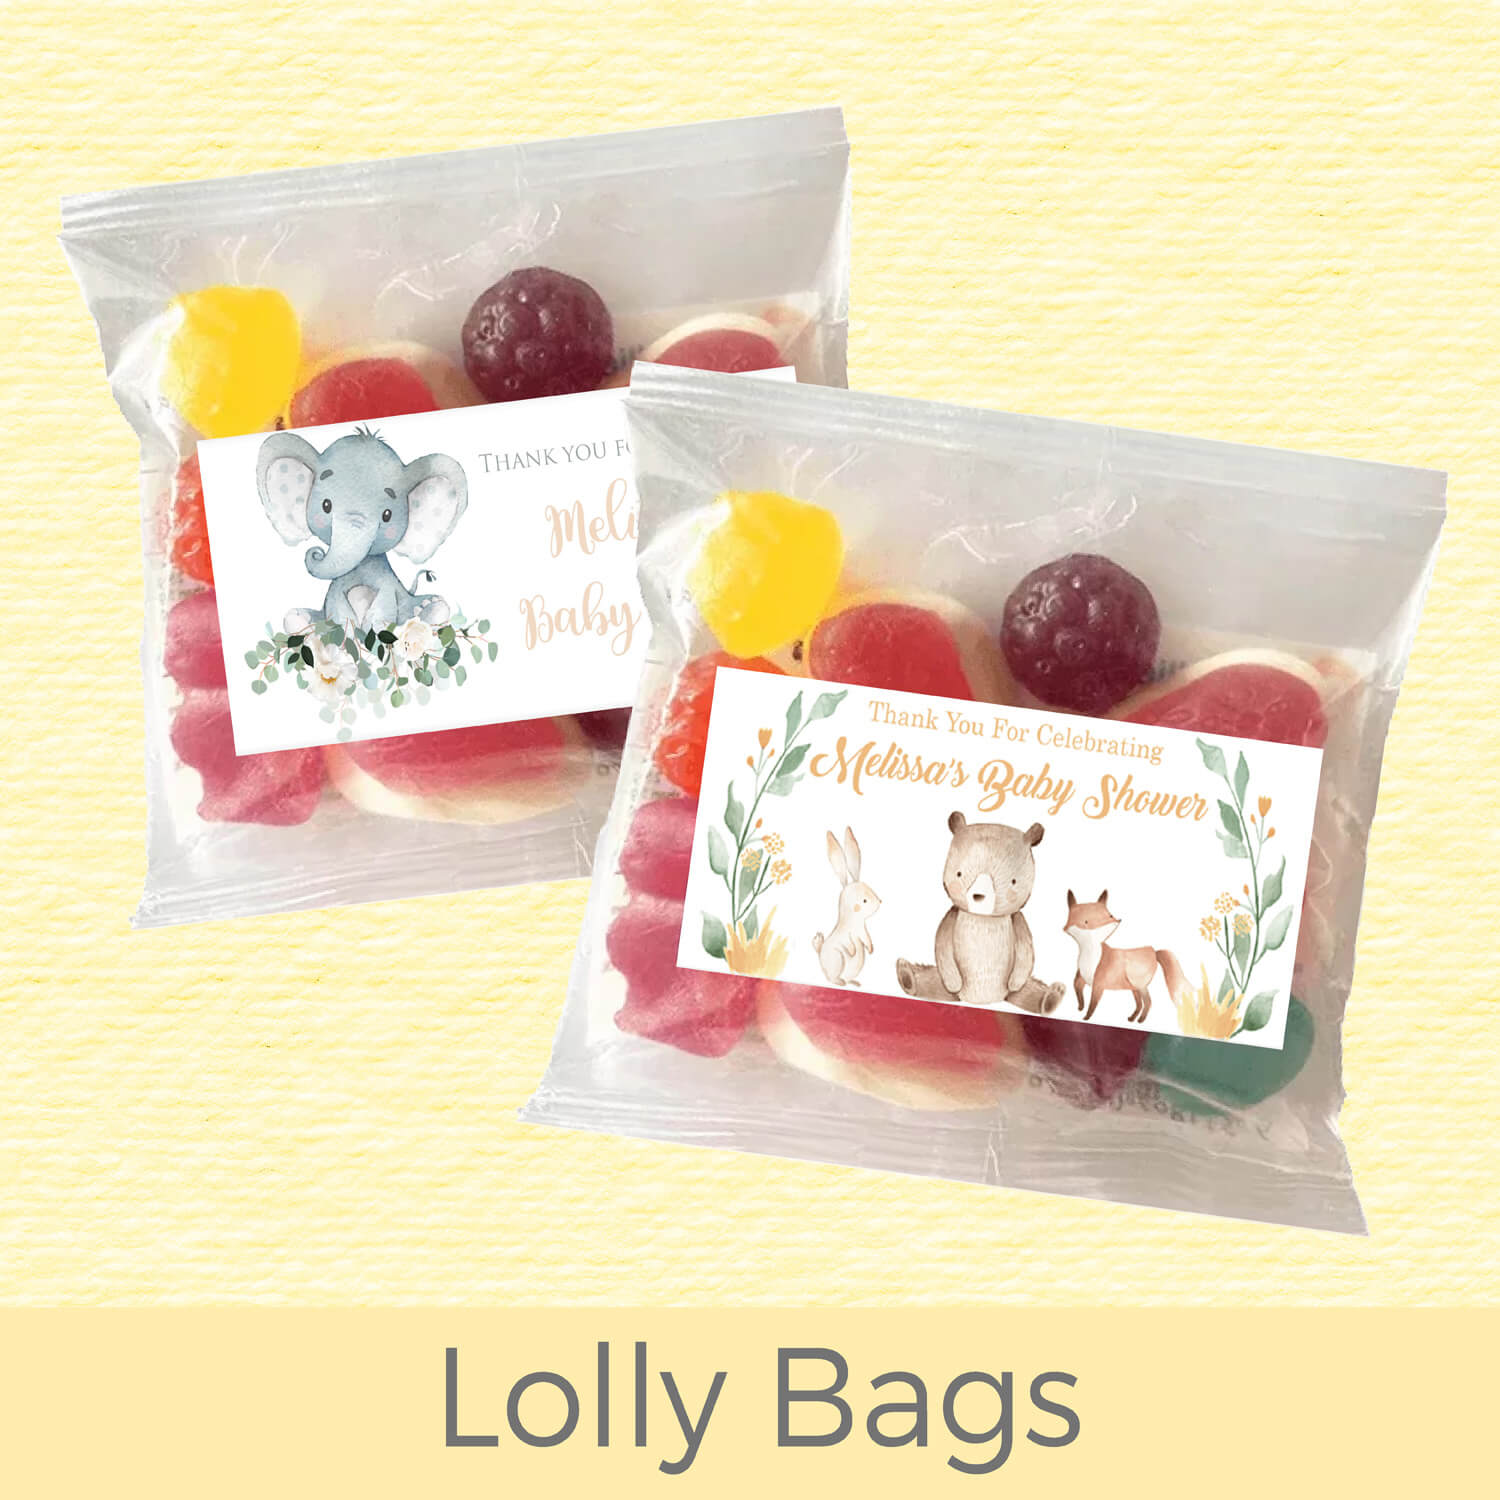 Personalised Lollipops and Loly Bags